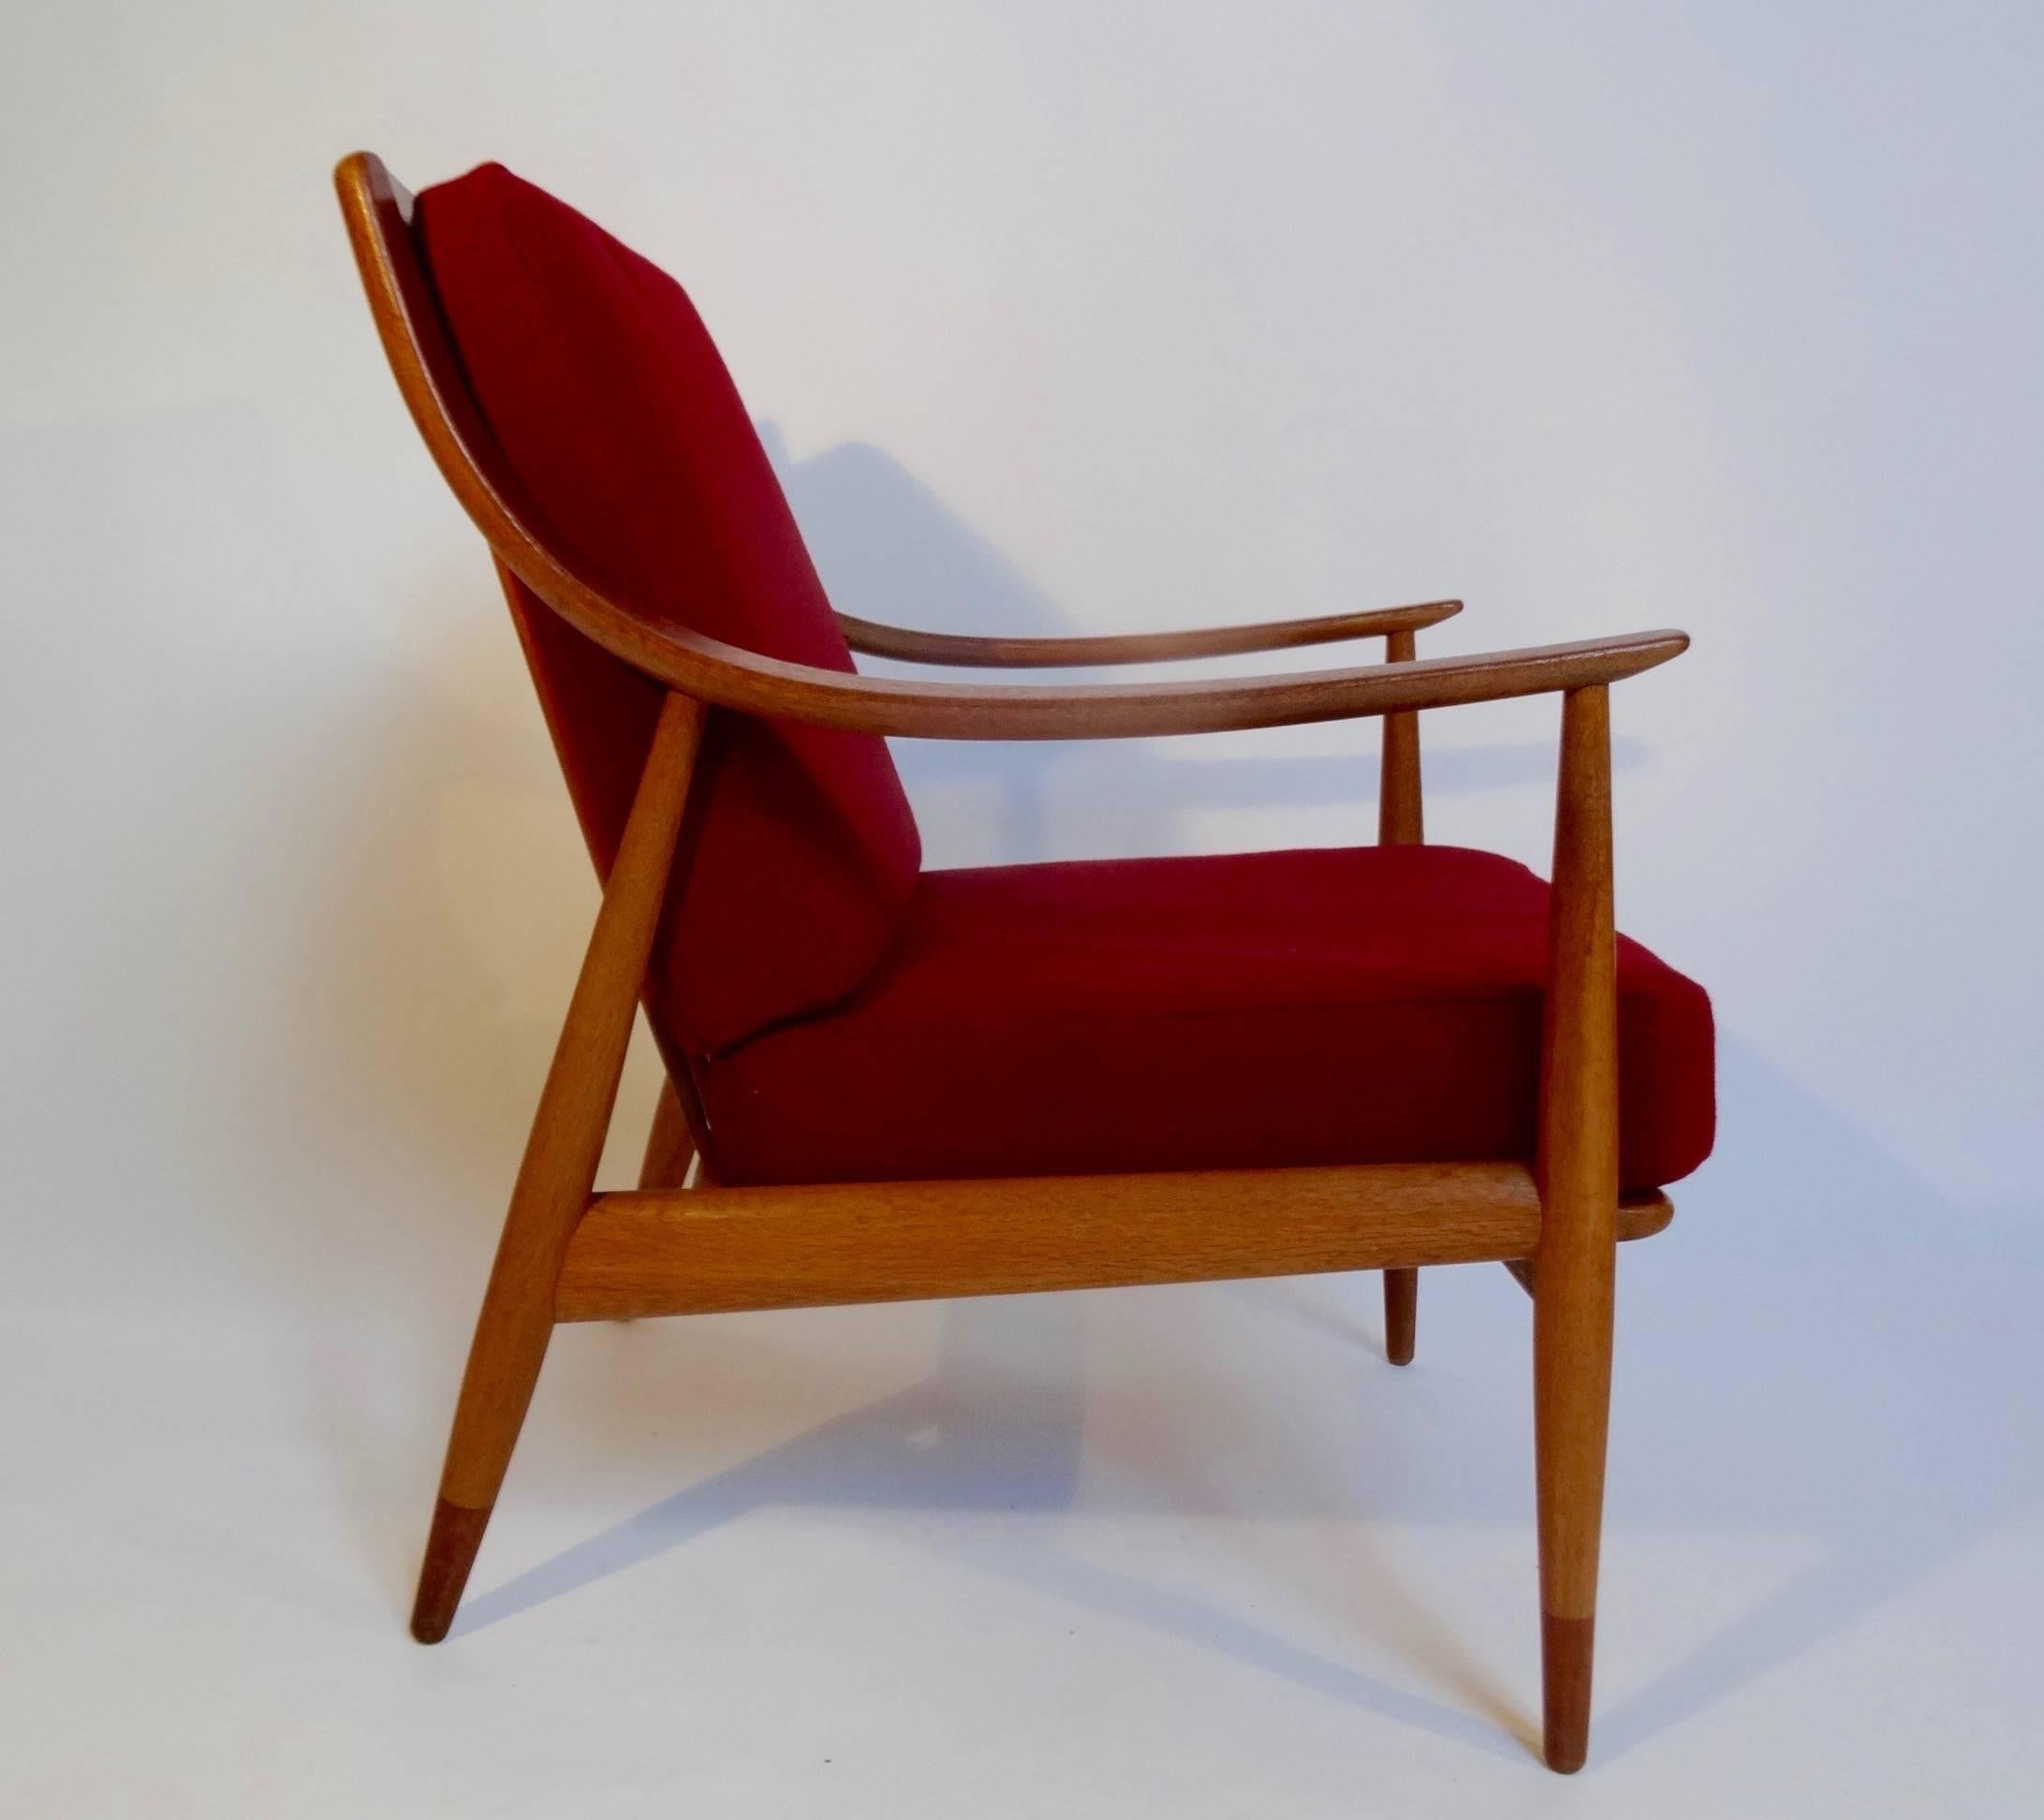 Easy chair, ‘FD 147’, designed by Danish design duo Peter Hvidt and Orla Mølgaard Nielsen for France & Daverkosen in 1953. It is made from teak and oak and has been newly upholstered with a burgundy red fabric, Hallingdal 65, from Kvadrat, designed